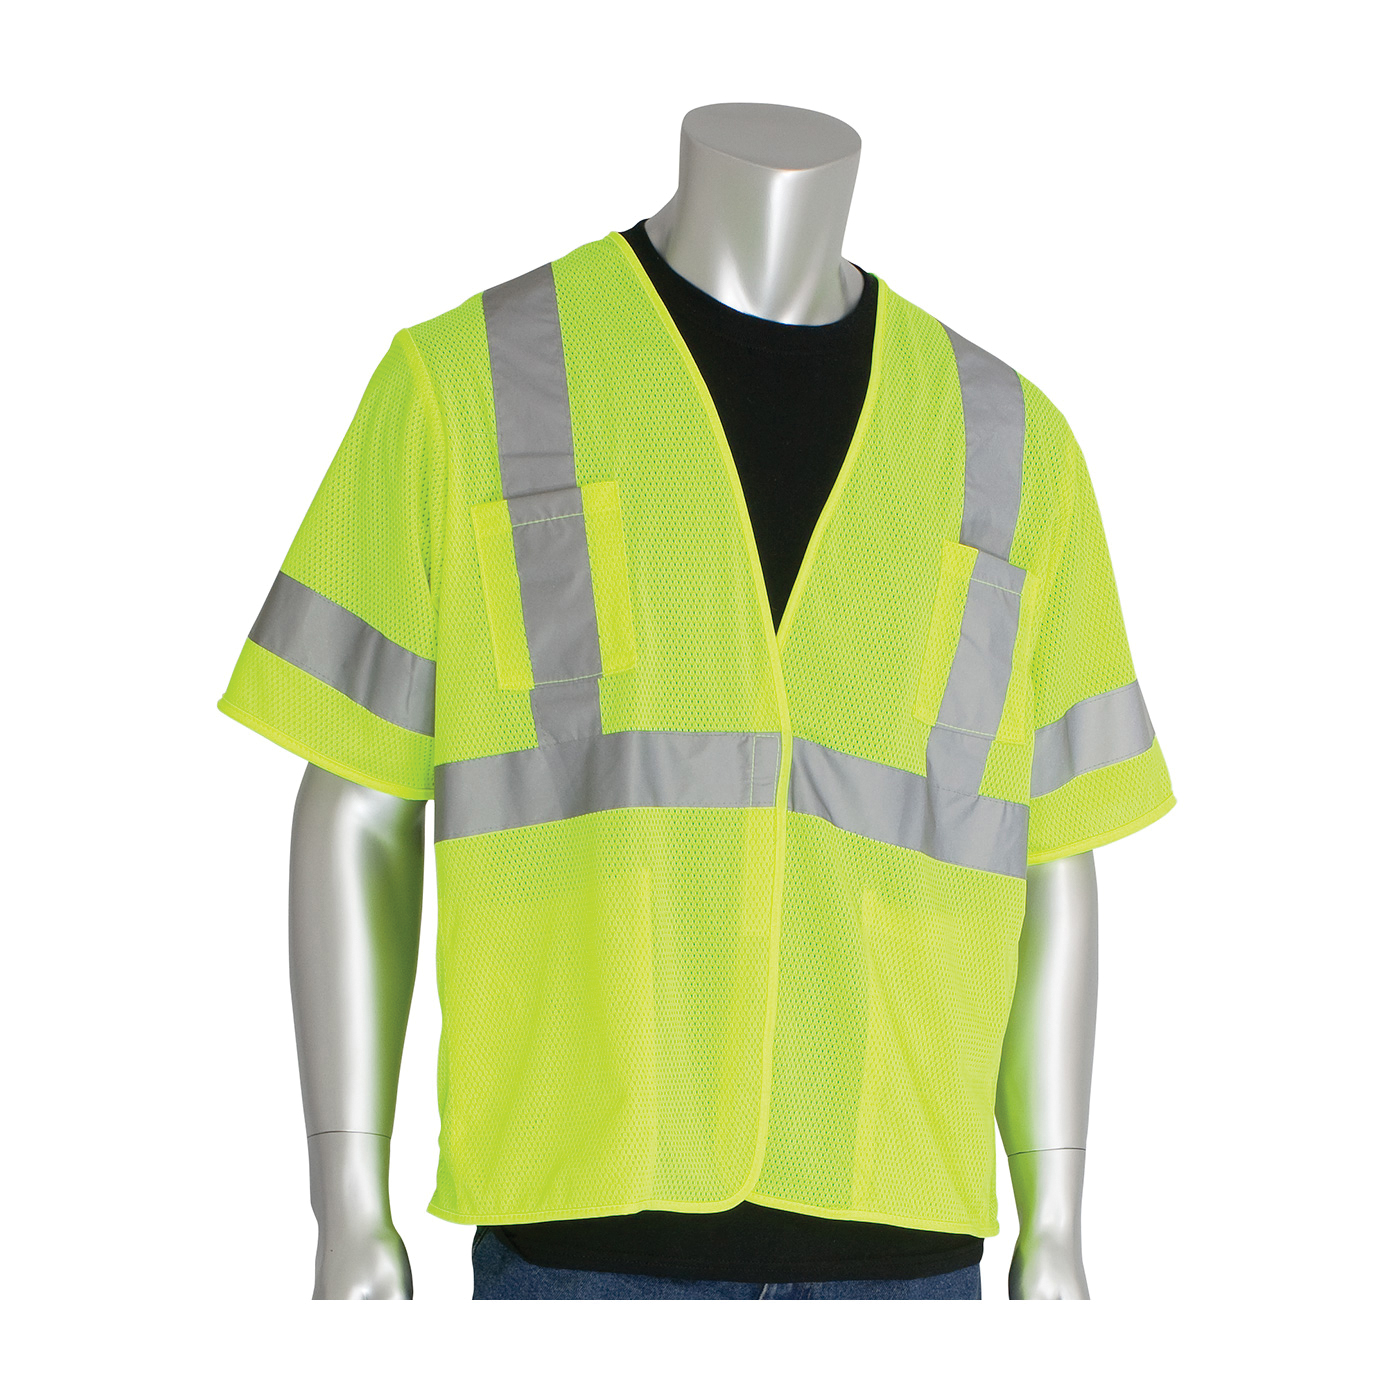 PIP® 303-HSVELY-4X Safety Vest, 4XL, Hi-Viz Lime Yellow, Polyester Mesh, Hook and Loop Closure, 4 Pockets, ANSI Class: Class 3, ANSI 107 Type R